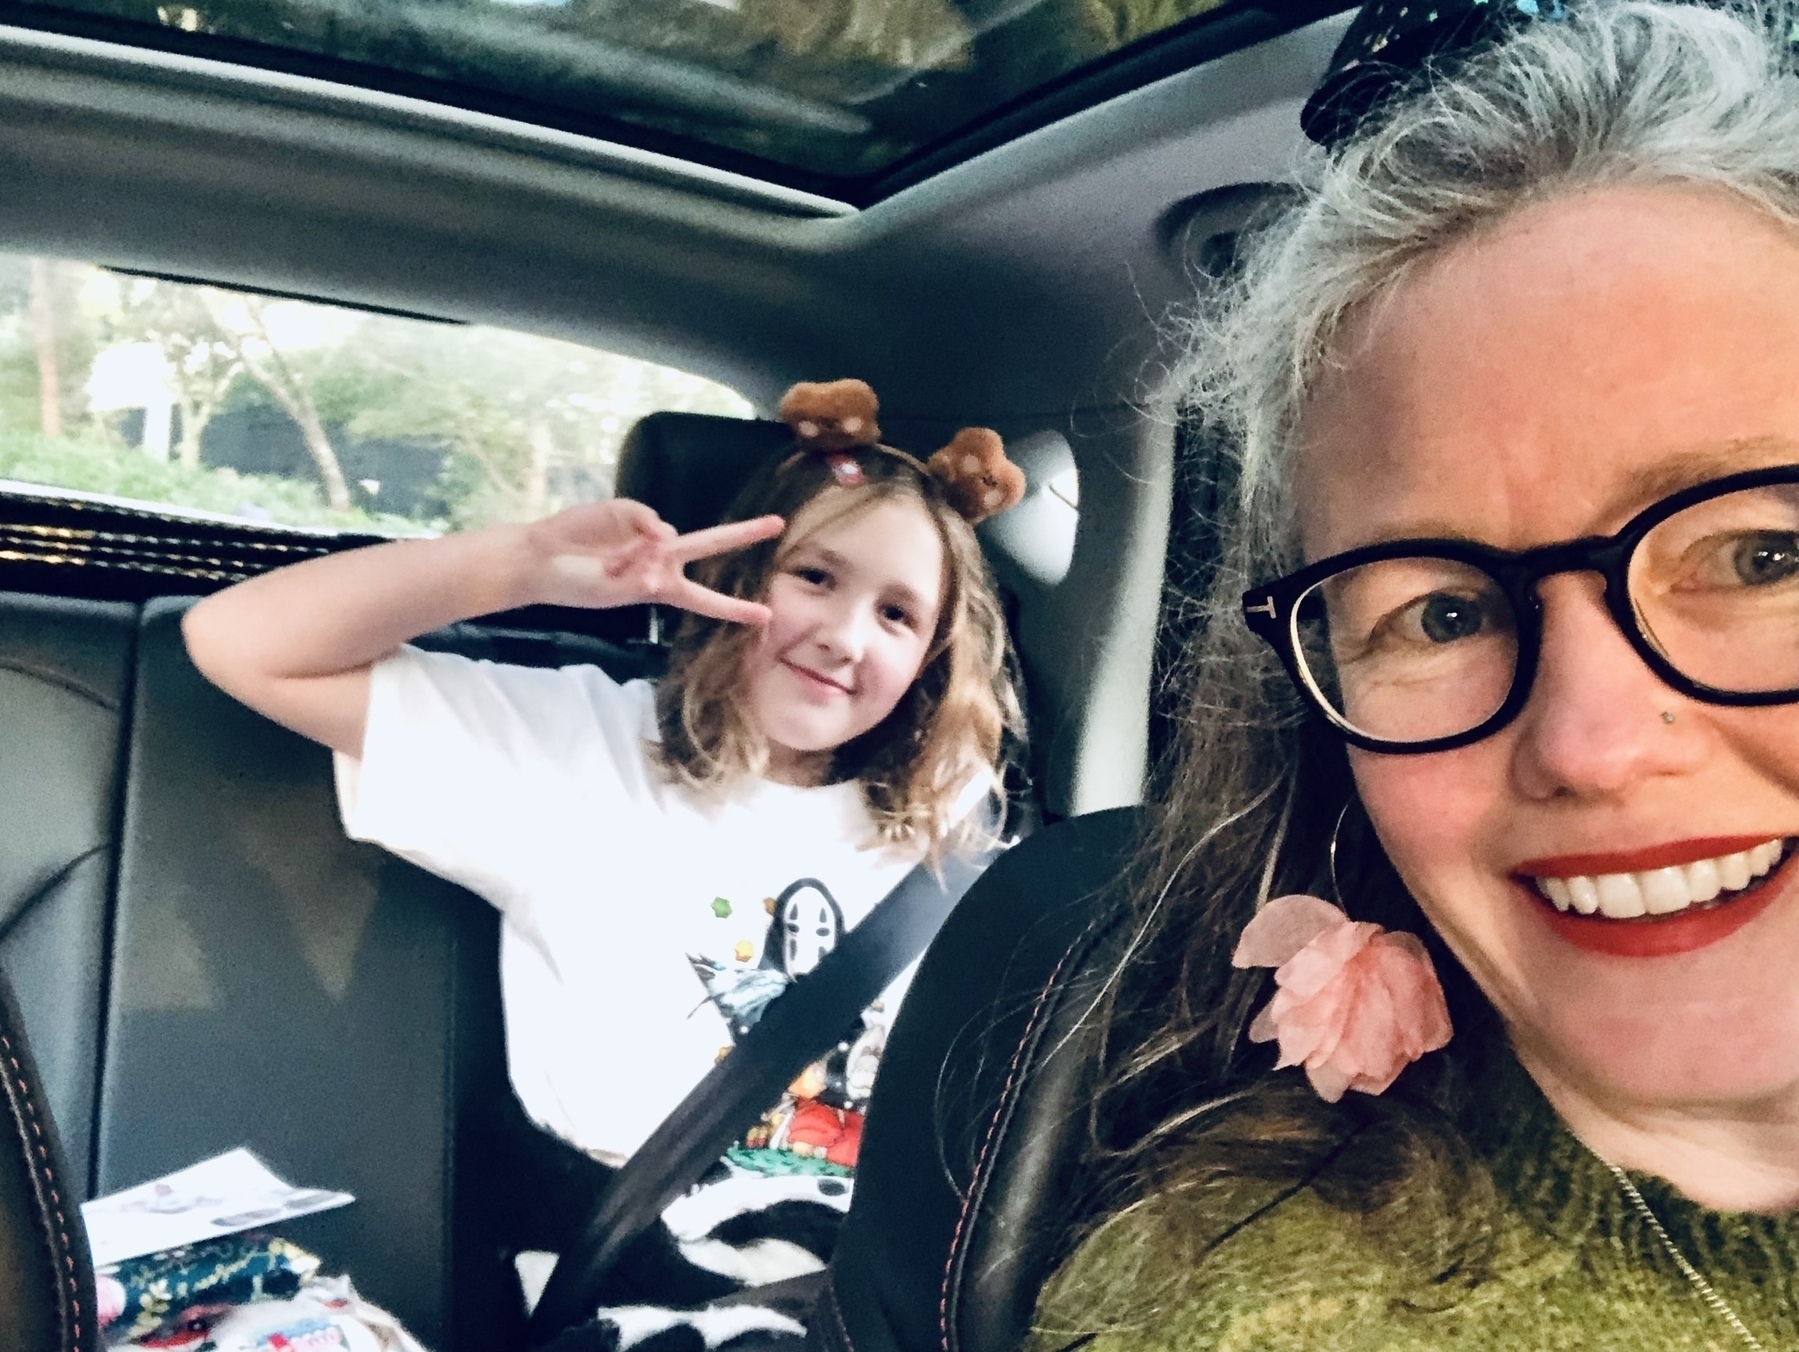 Young girl and mum dressed up and taking a selfie in the car before going to a party 